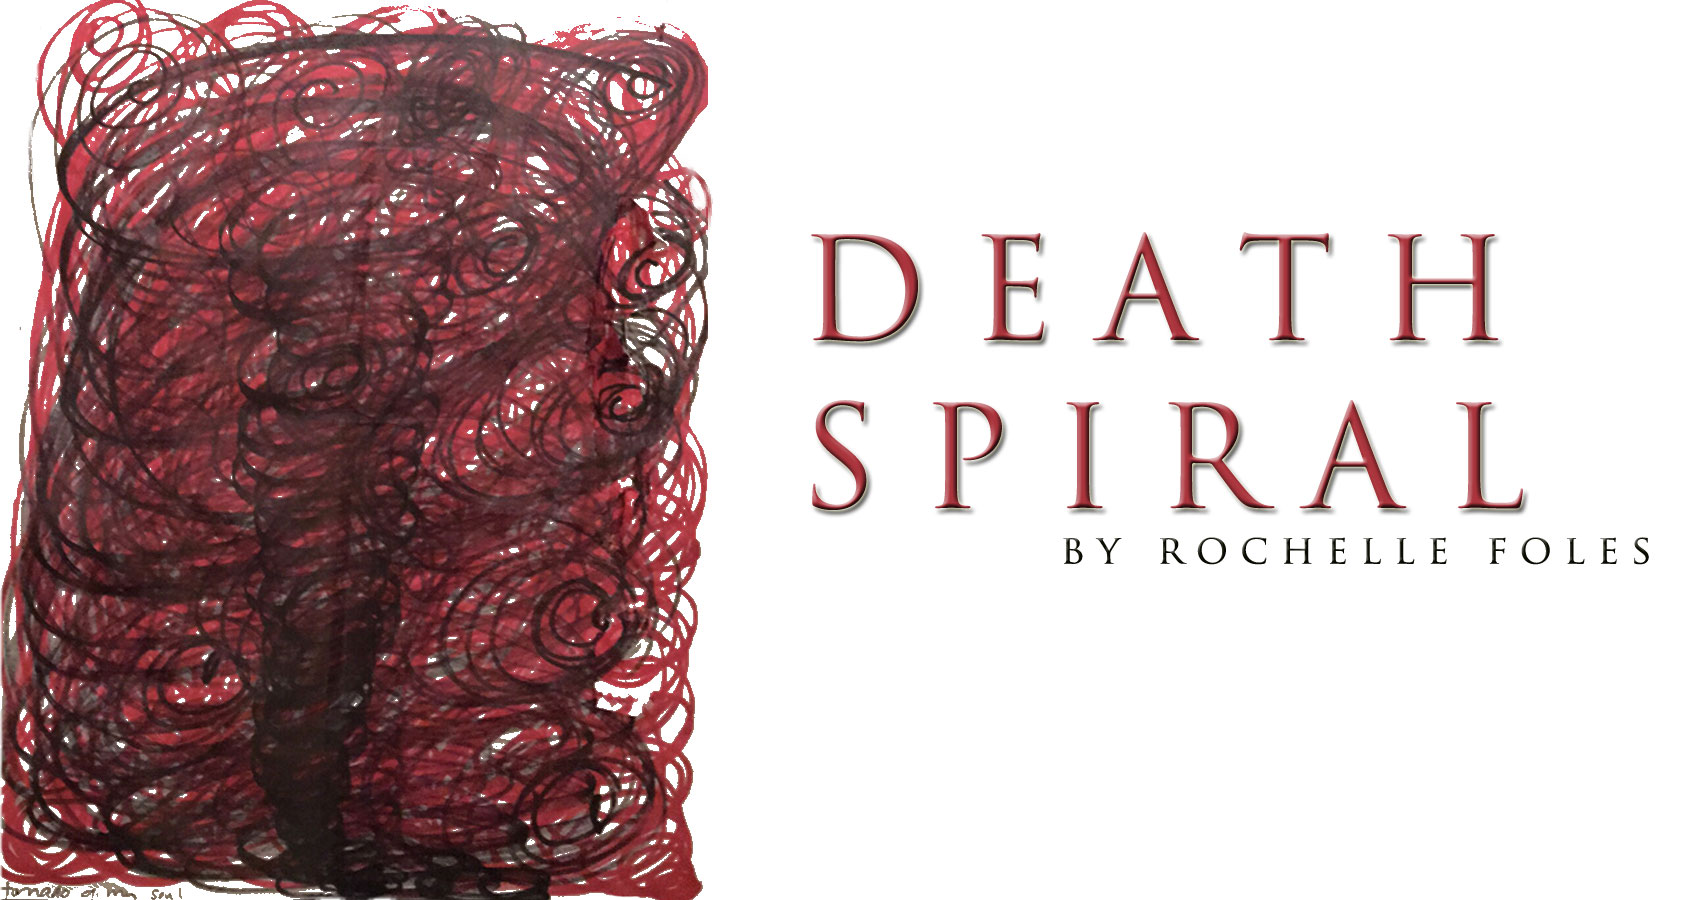 DEATH SPIRAL by Rochelle Foles at Spillwords.com